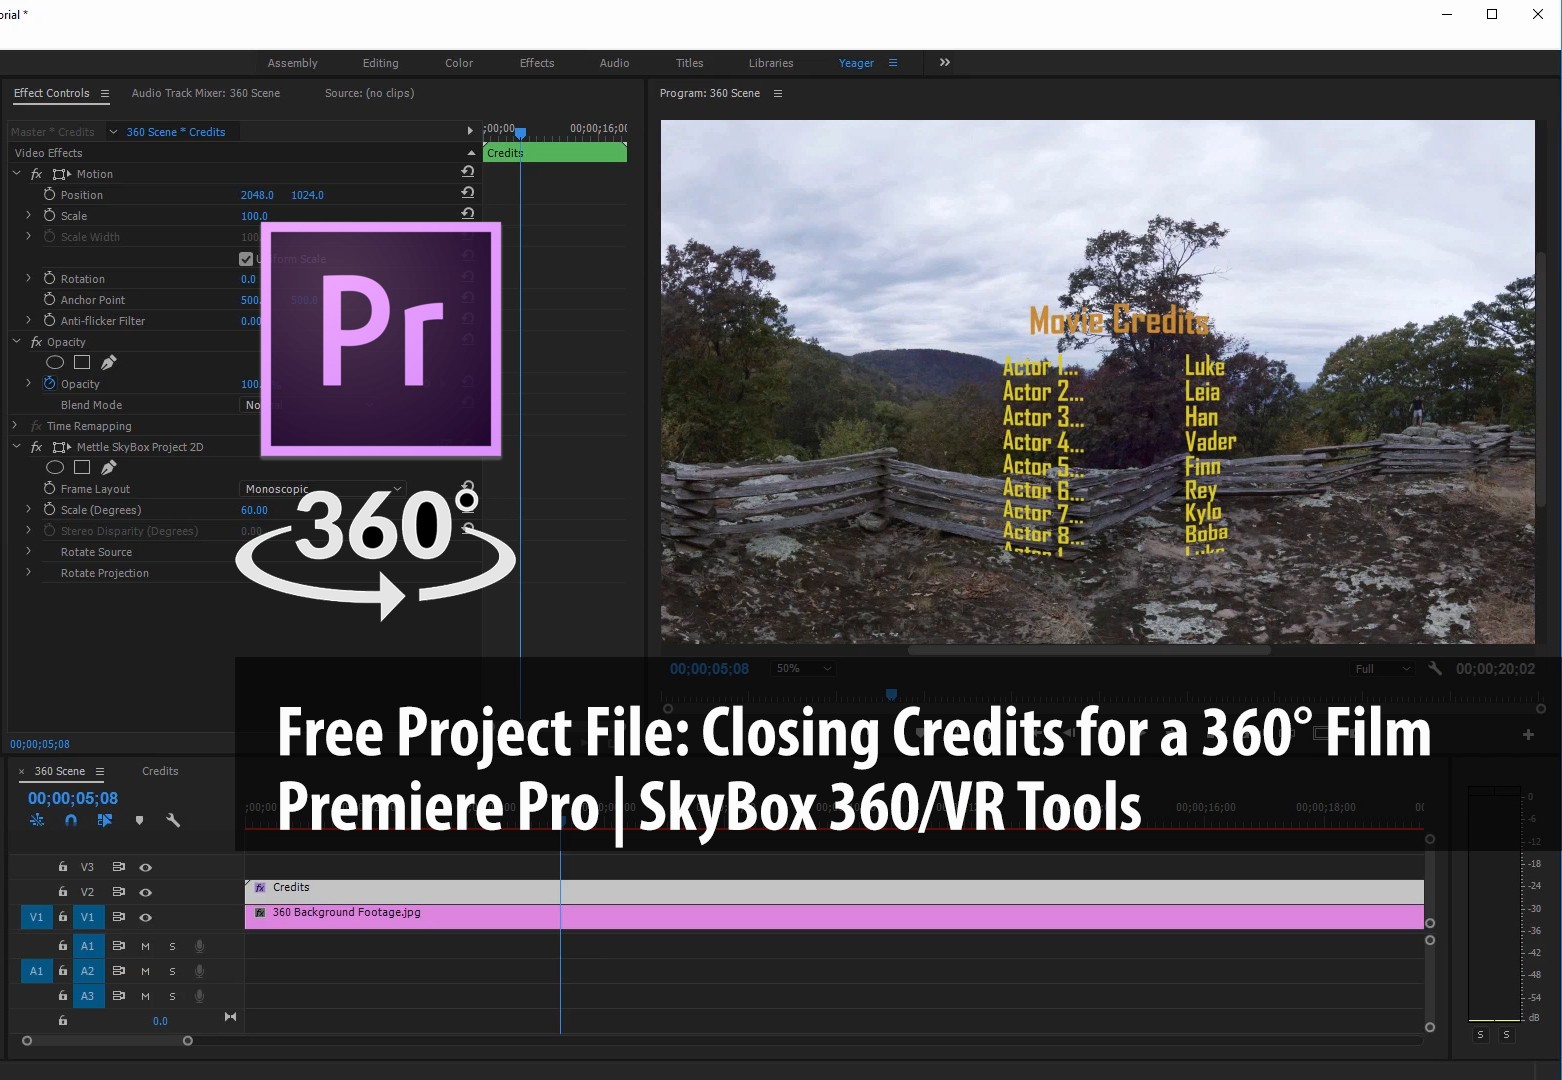 Free Project File | Closing Credits to a 360° Movie | SkyBox 360/VR Tools